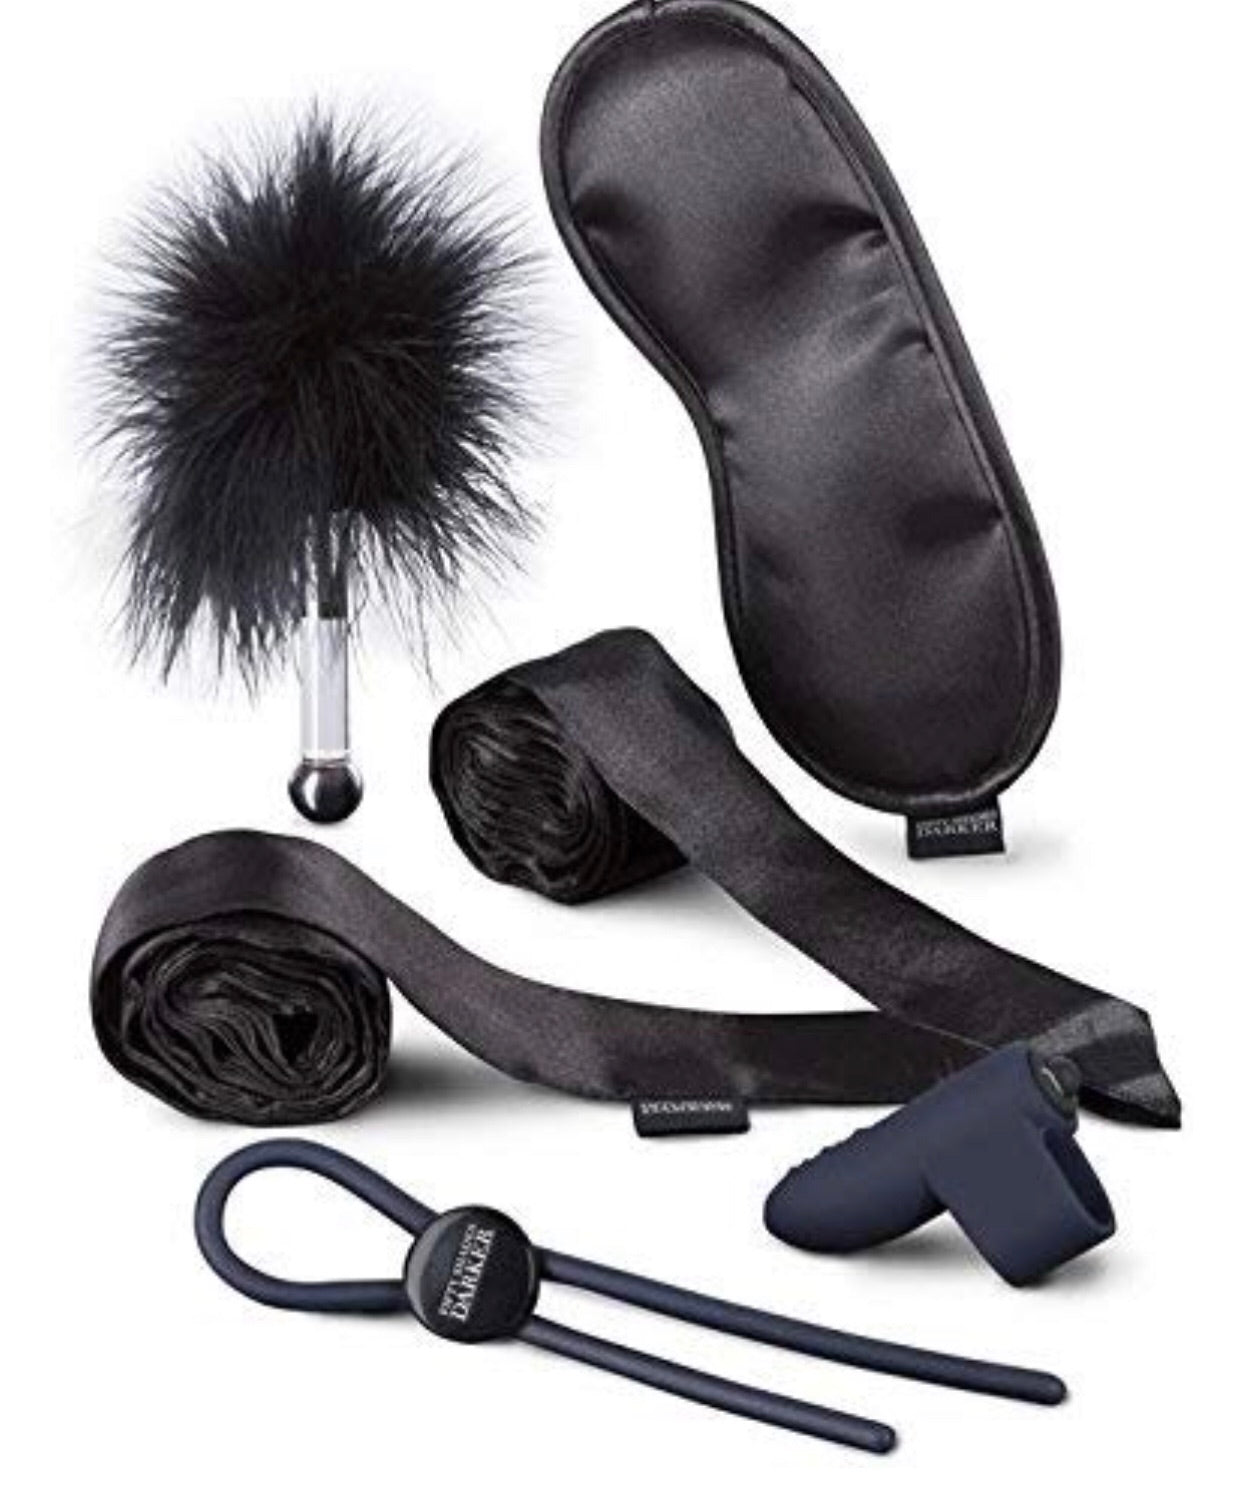 Fifty Shades of Grey Lust you Kit